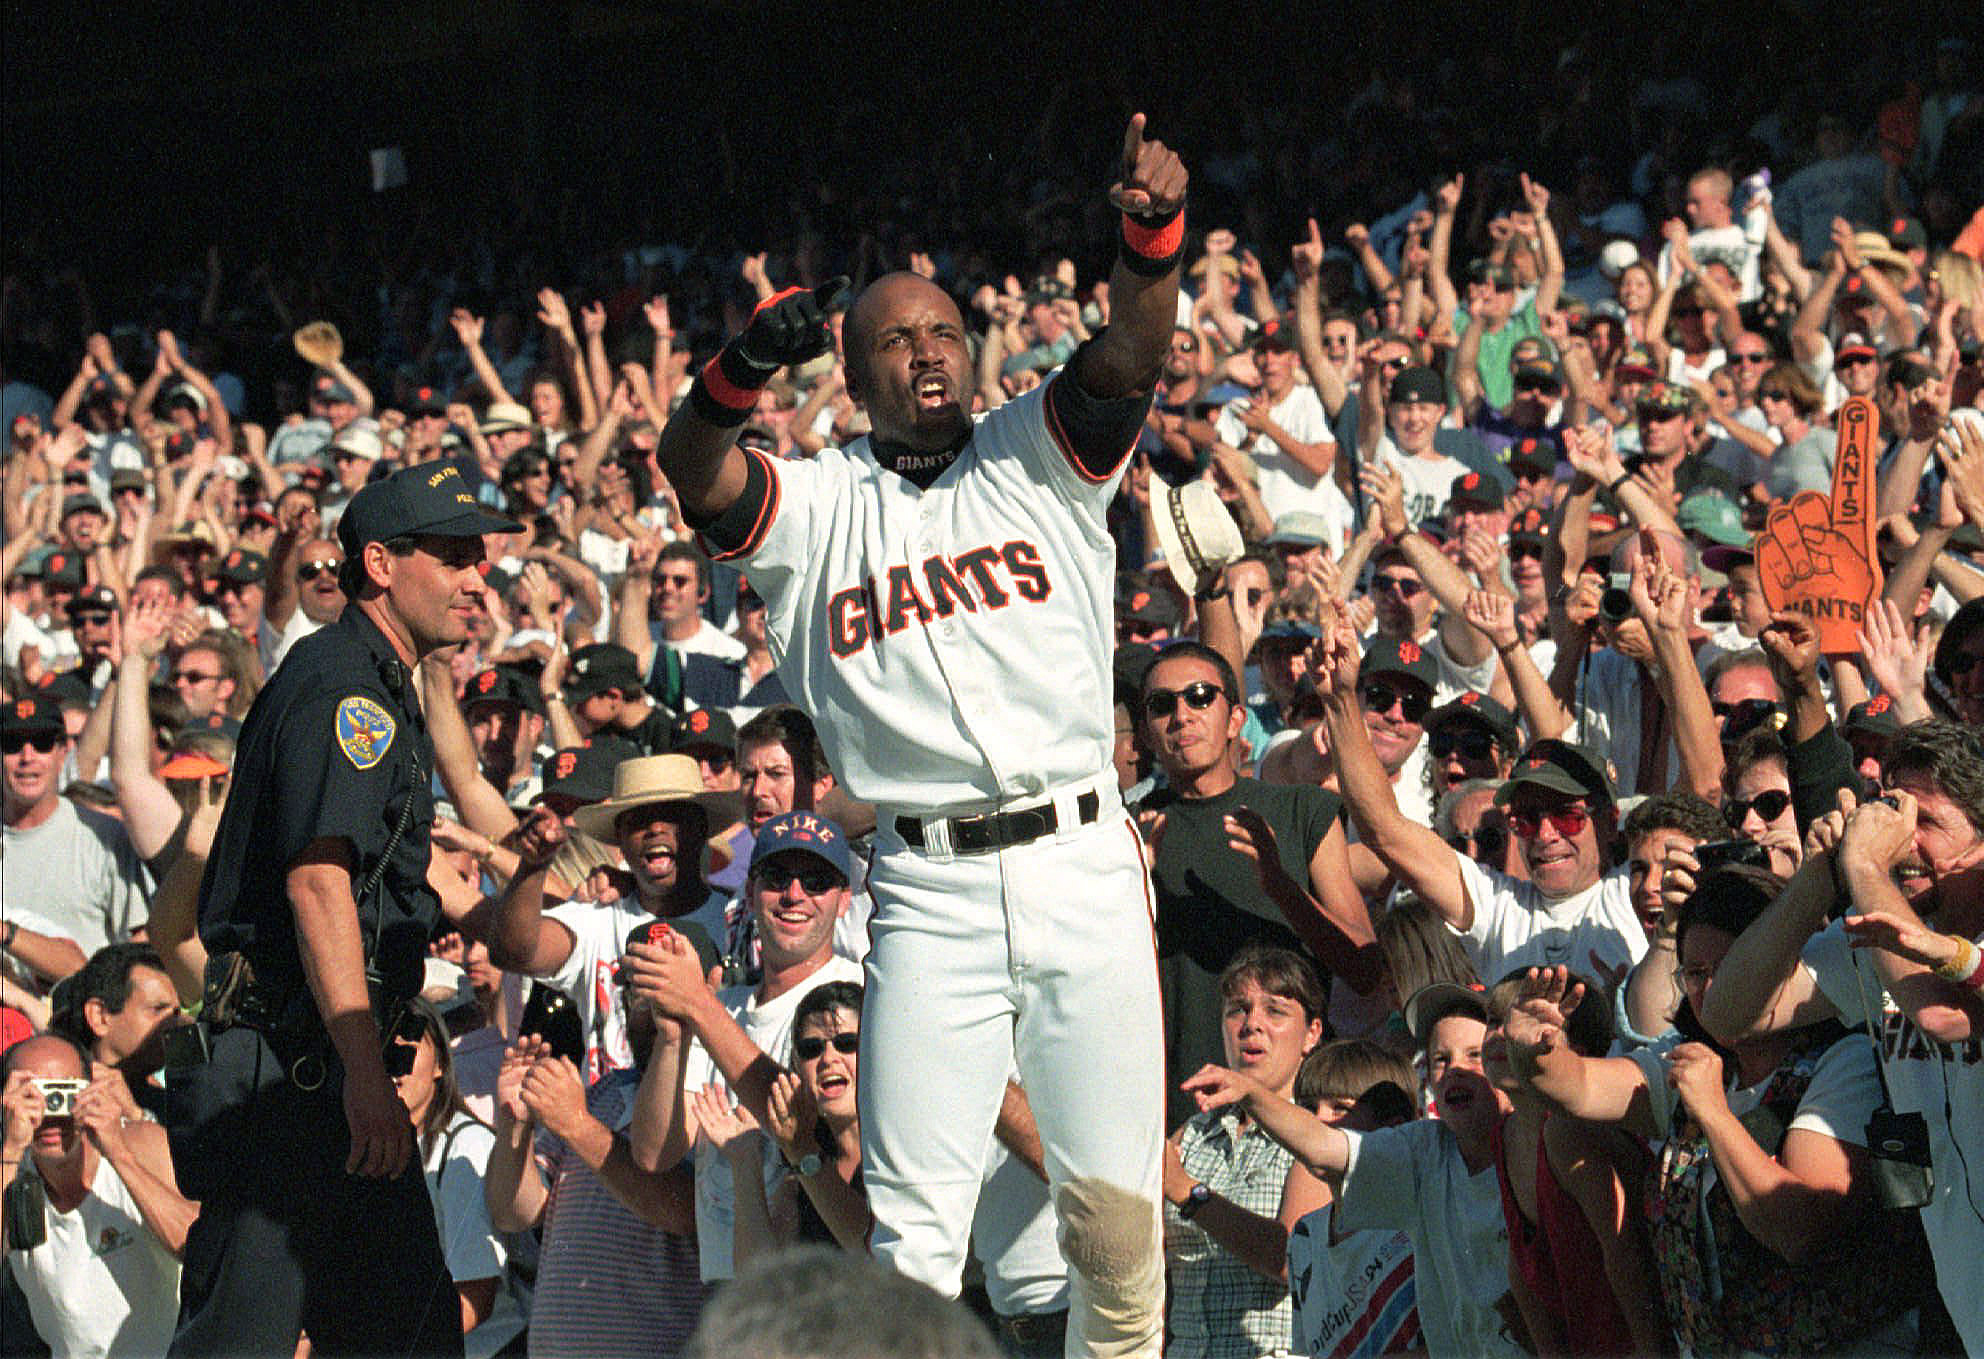 Watch: Barry Bonds receives applause at Chase Center during the